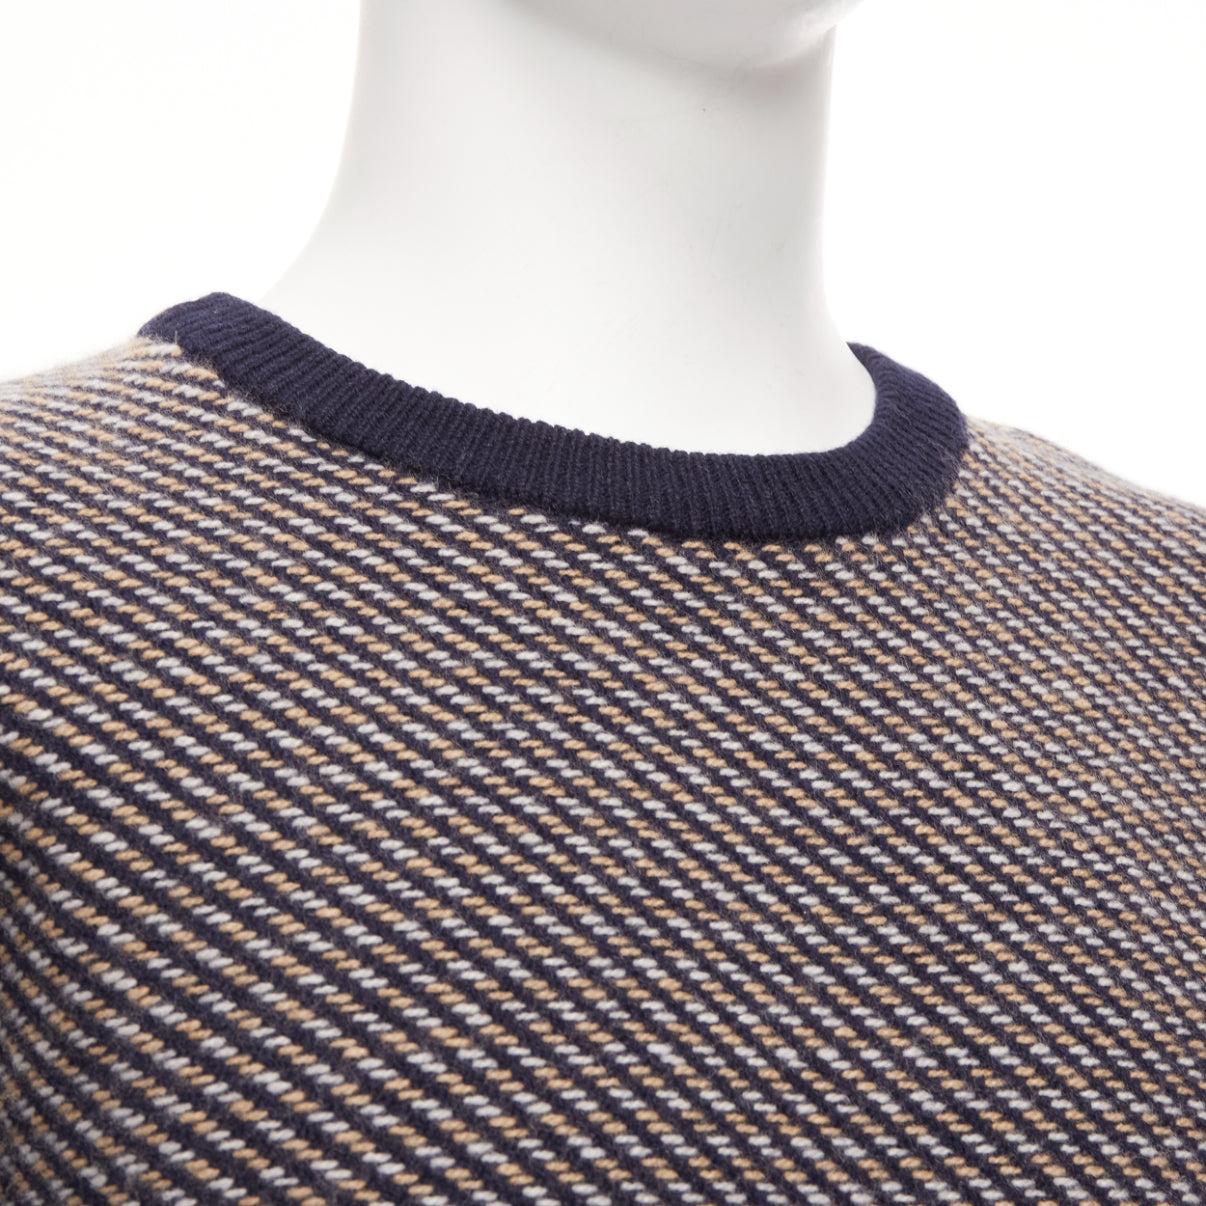 A.P.C. navy beige diagonal weave crew neck long sleeve ringer sweater M
Reference: JSLE/A00117
Brand: A.P.C.
Material: Wool
Color: Navy, Beige
Pattern: Striped
Closure: Pullover
Made in: Romania

CONDITION:
Condition: Very good, this item was